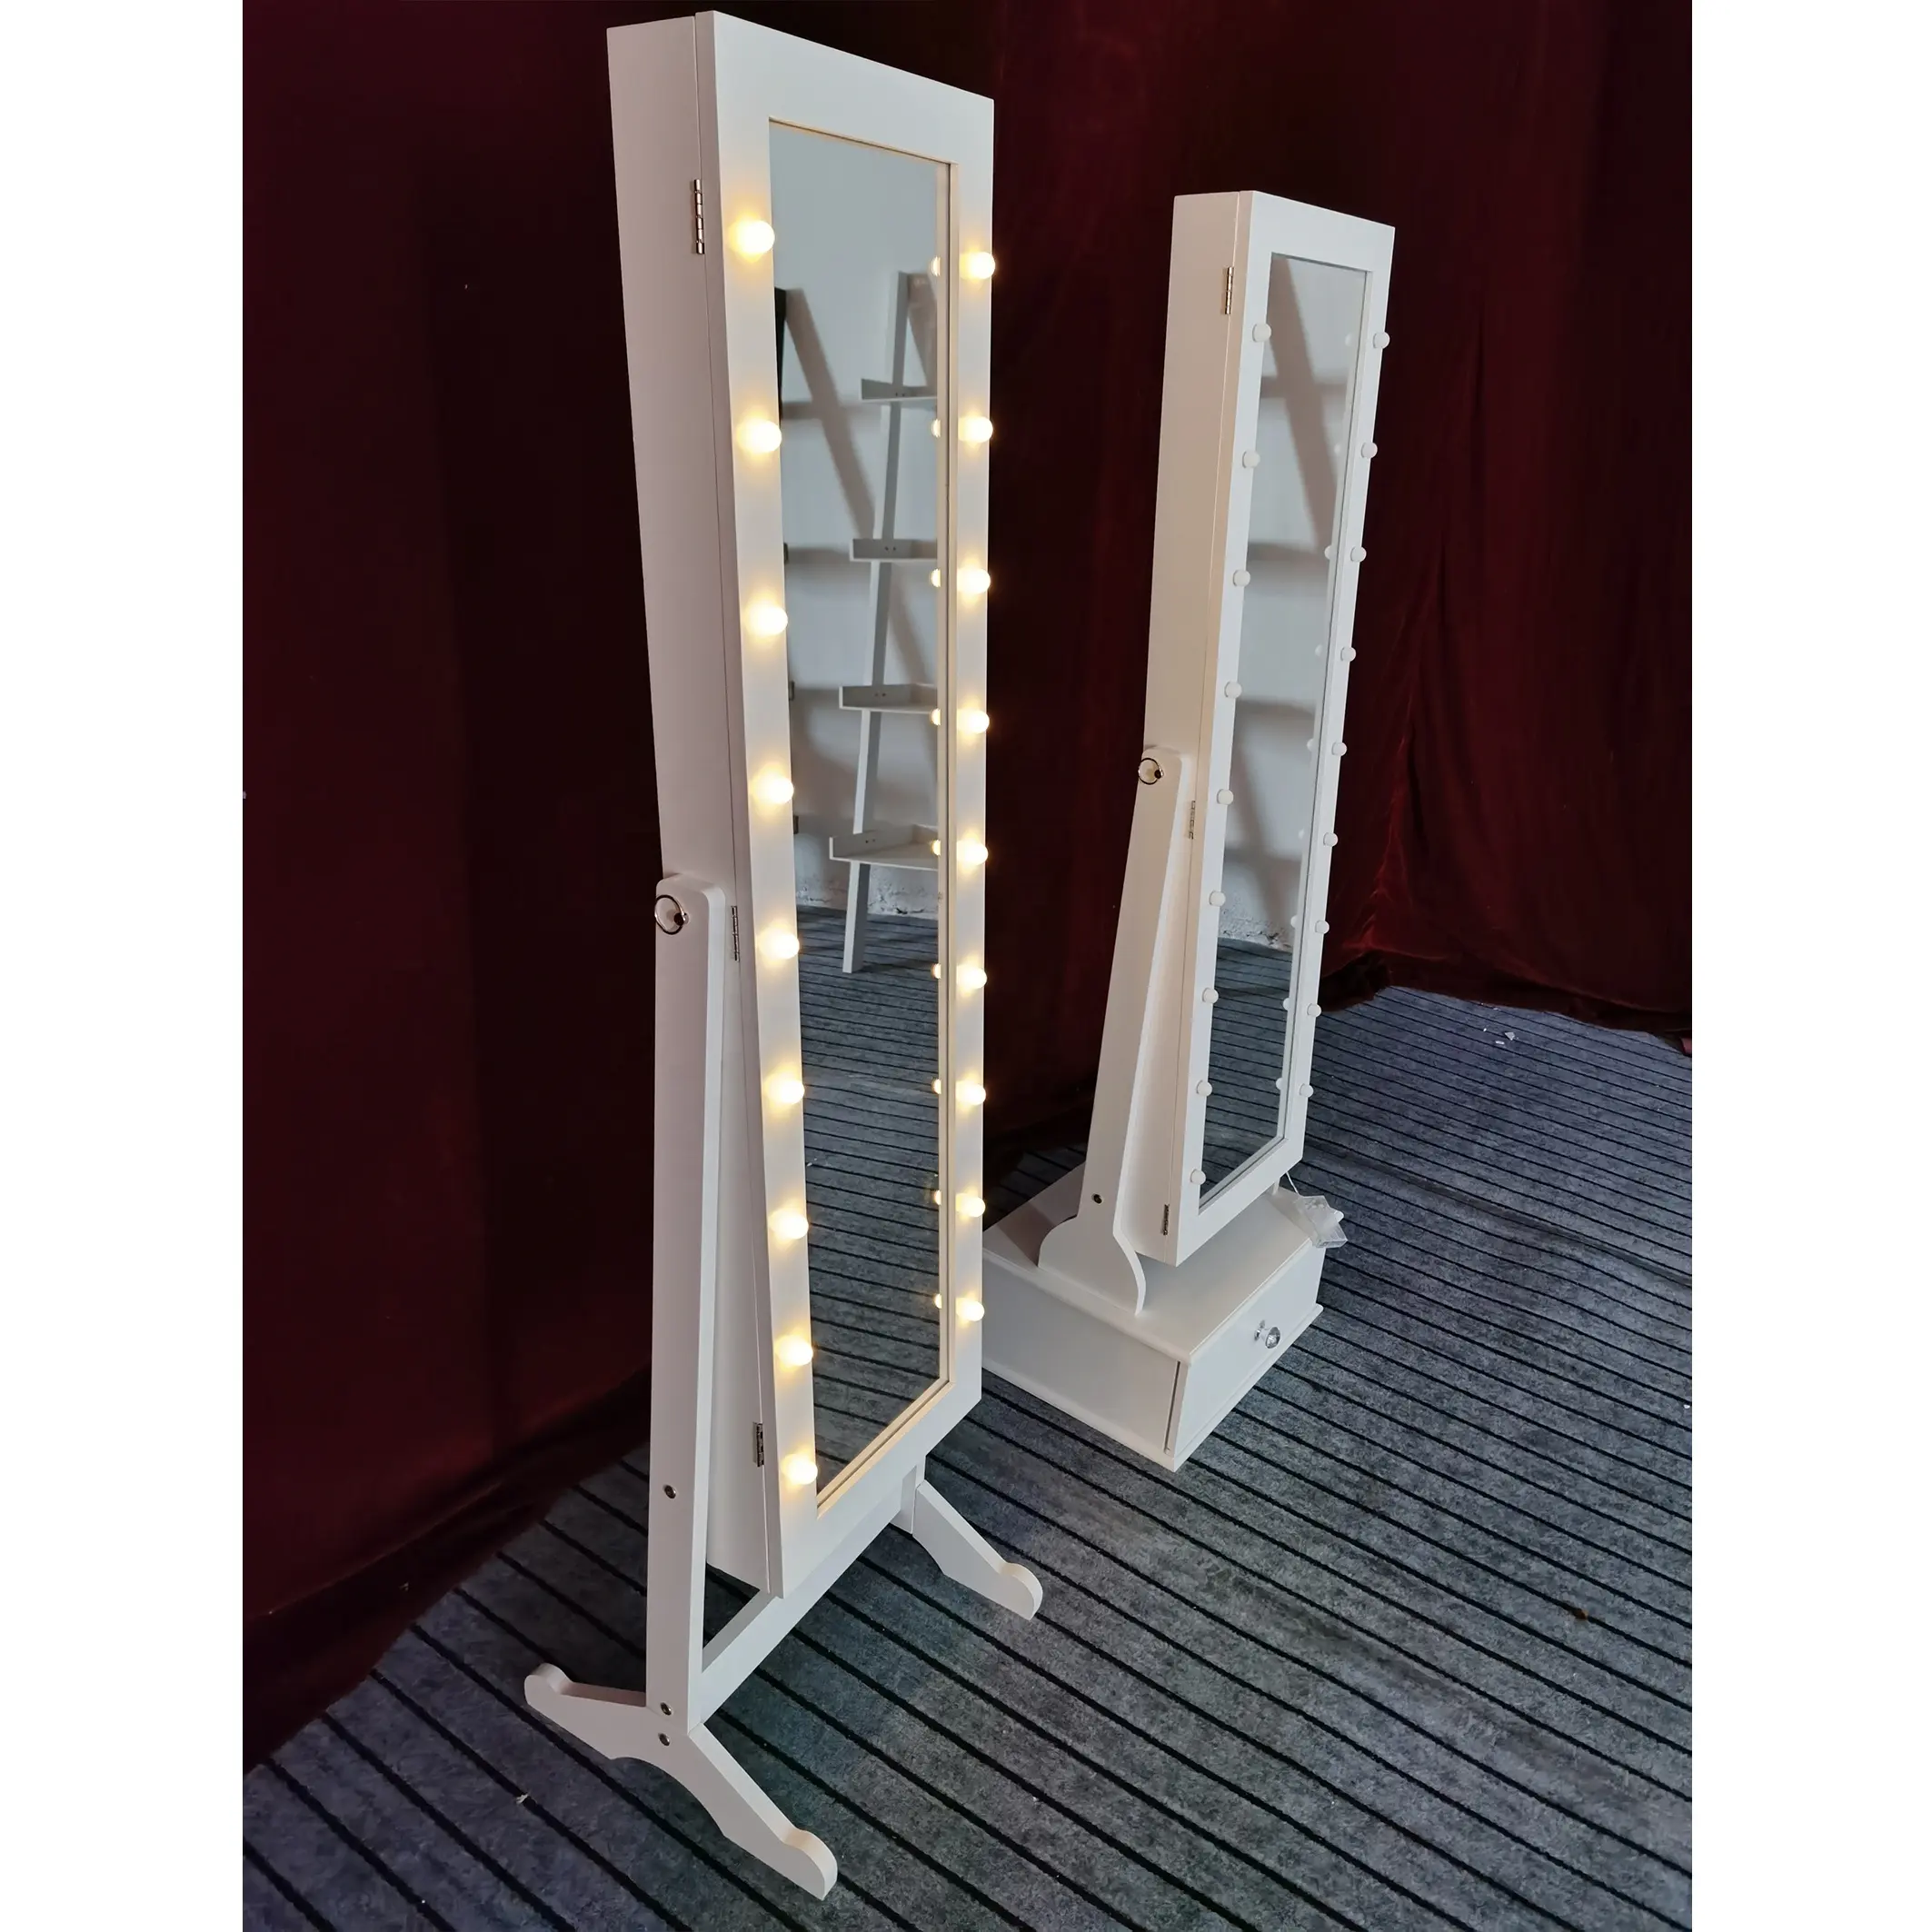 Pure White Bulb Lights Floor Organizer Jewelry Armoire Stand Mirror